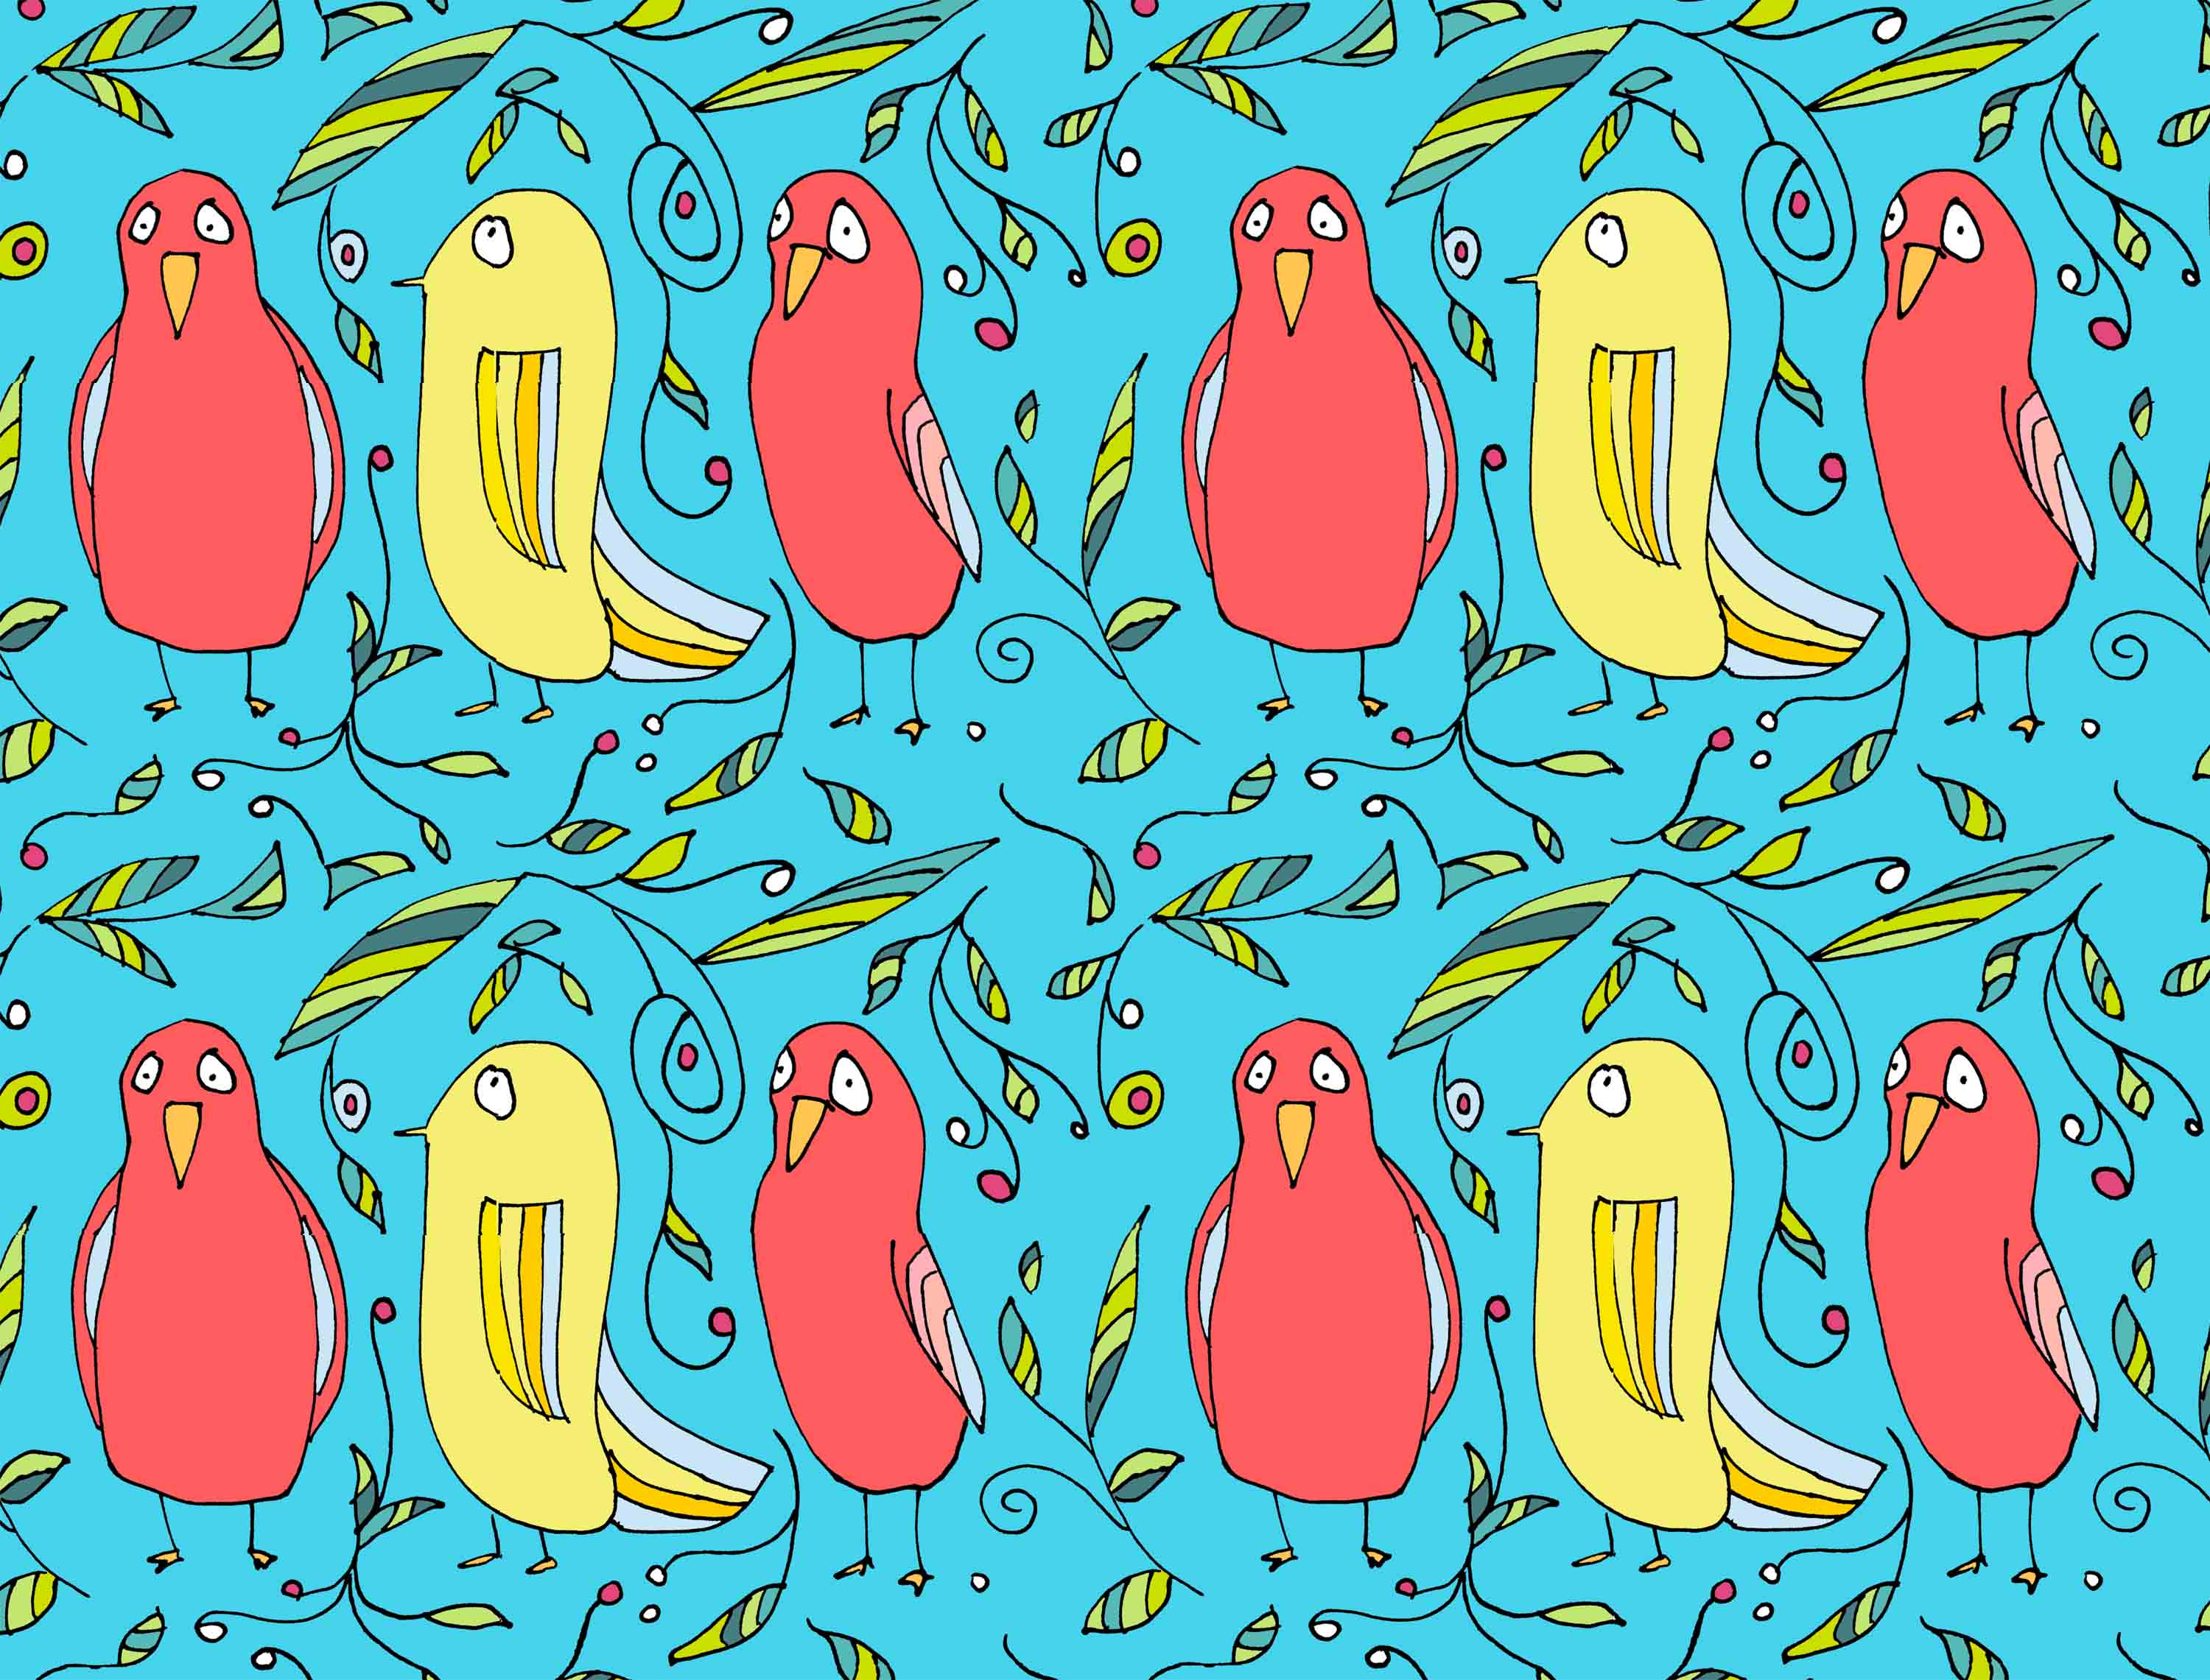 art every day number 122 / illustration / drawing / red birds yellow